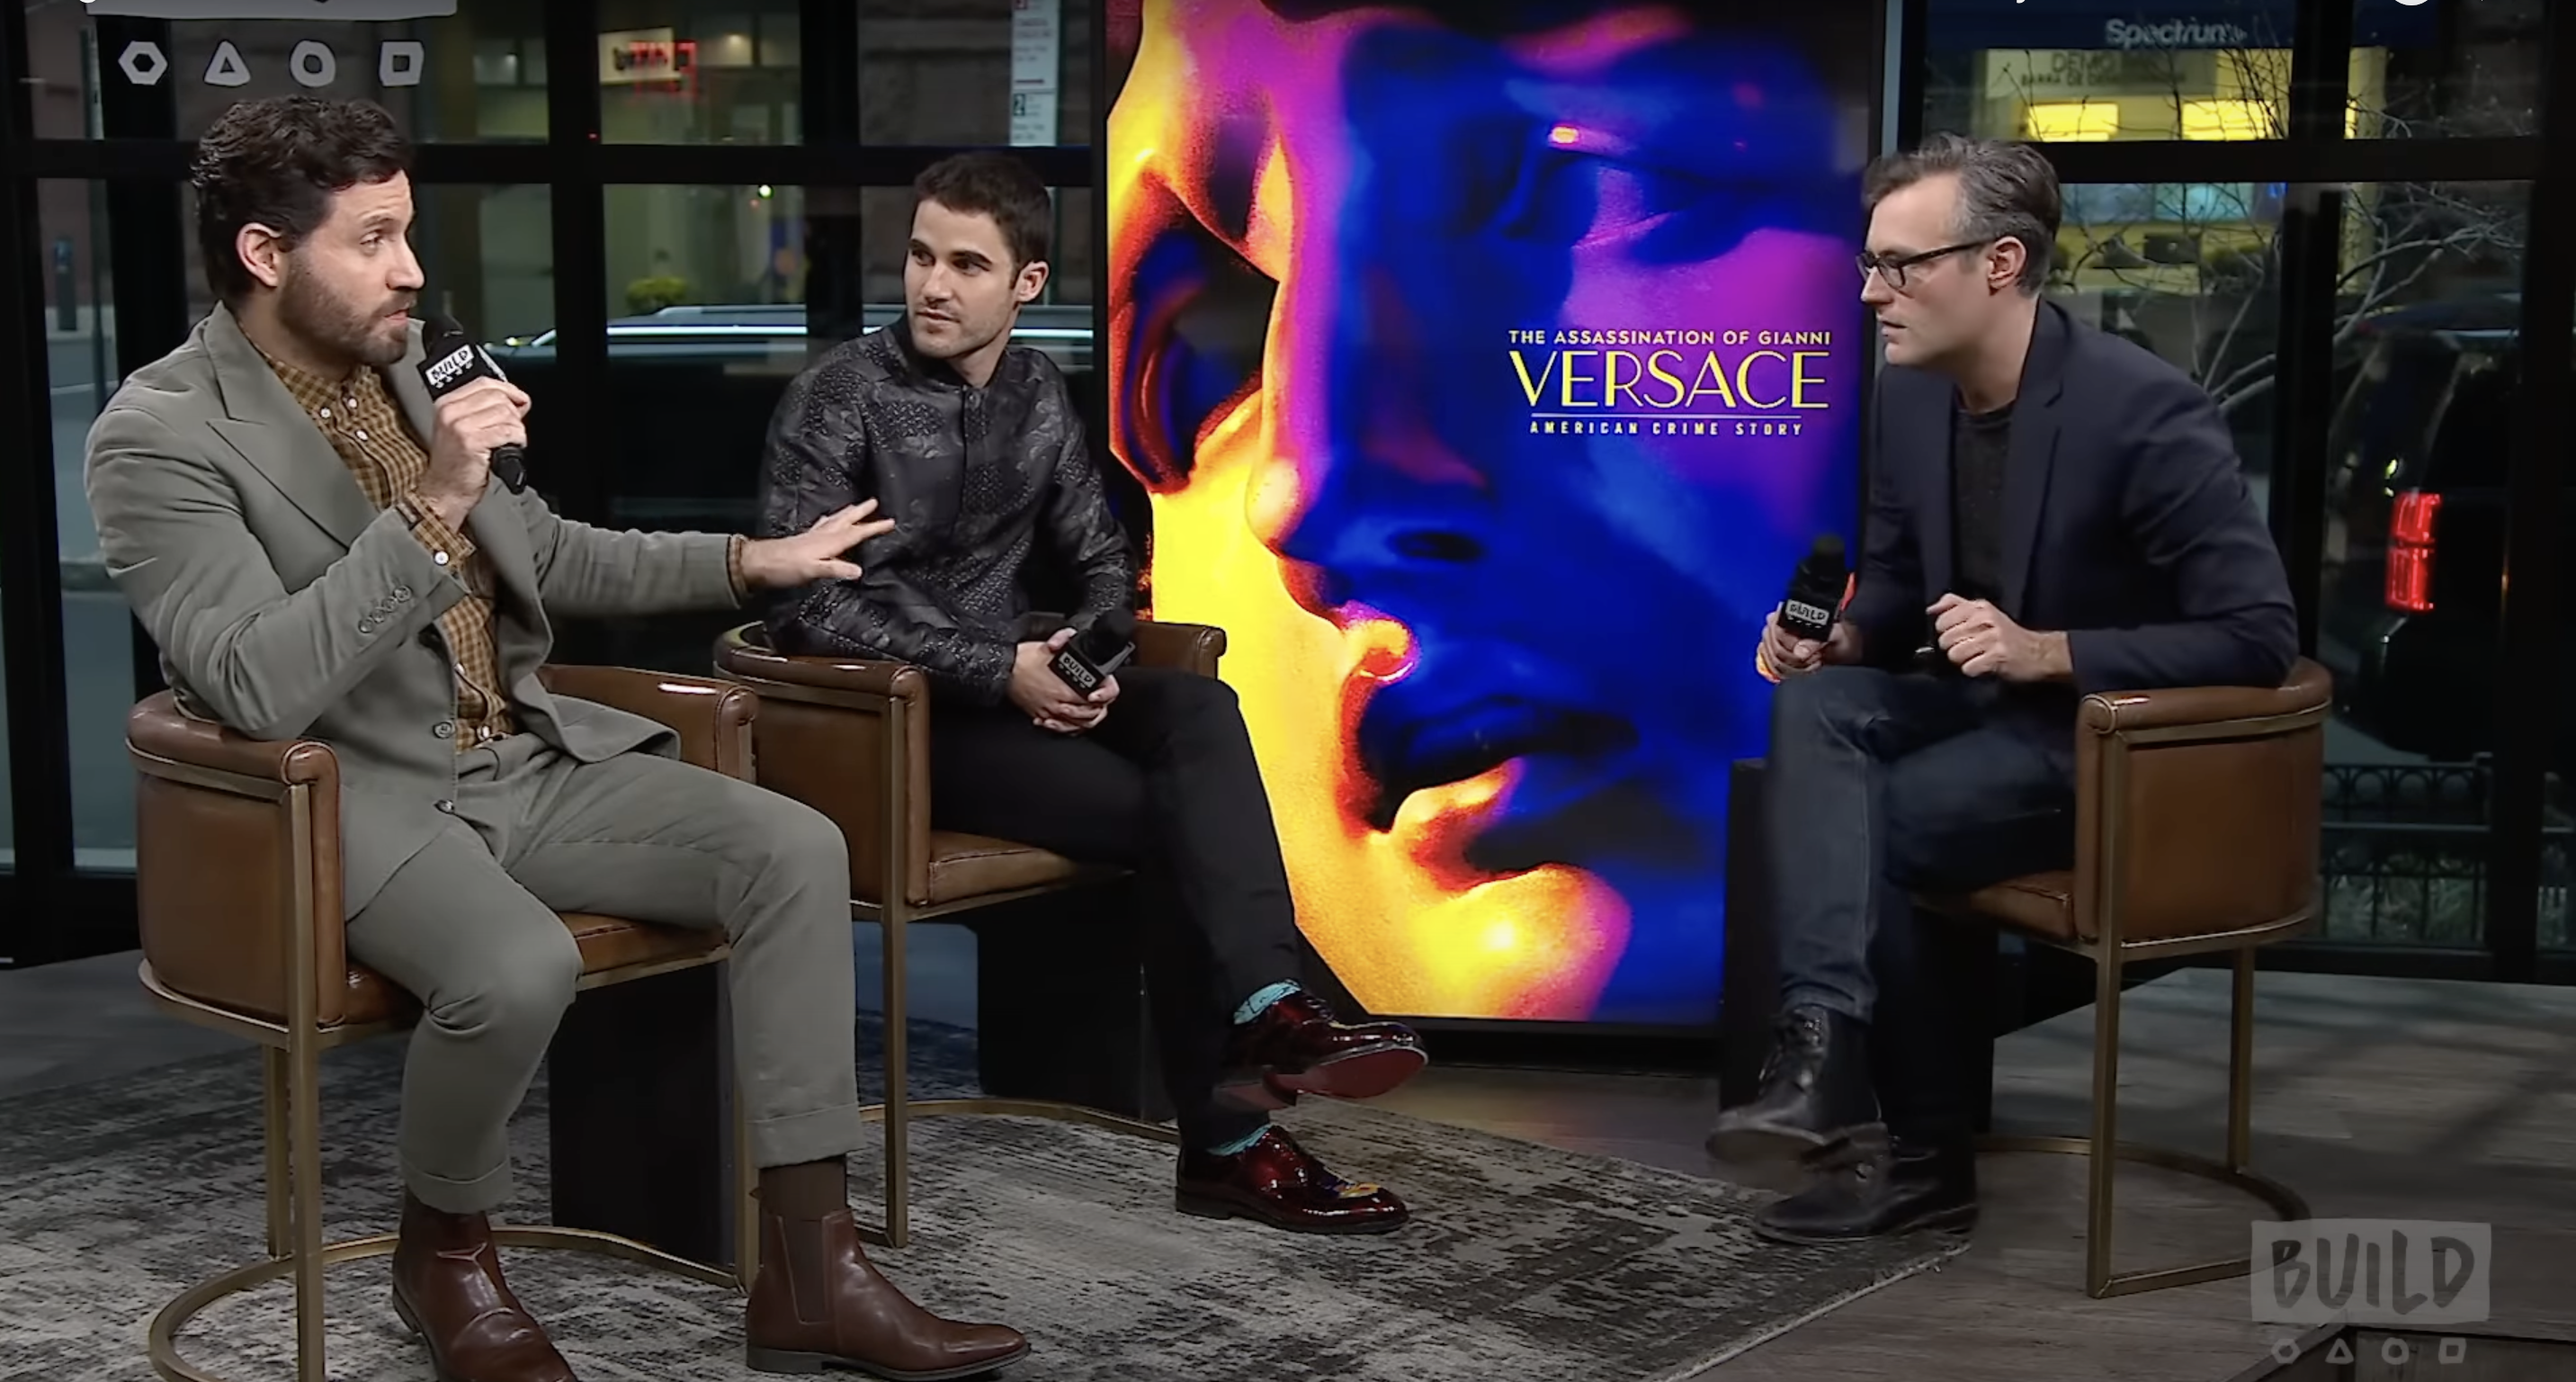 Edgar Ramirez & Darren Criss sit down with BUILD Series on "The Assassination of Gianni Versace: American Crime Story" Photo Credit: Build Series